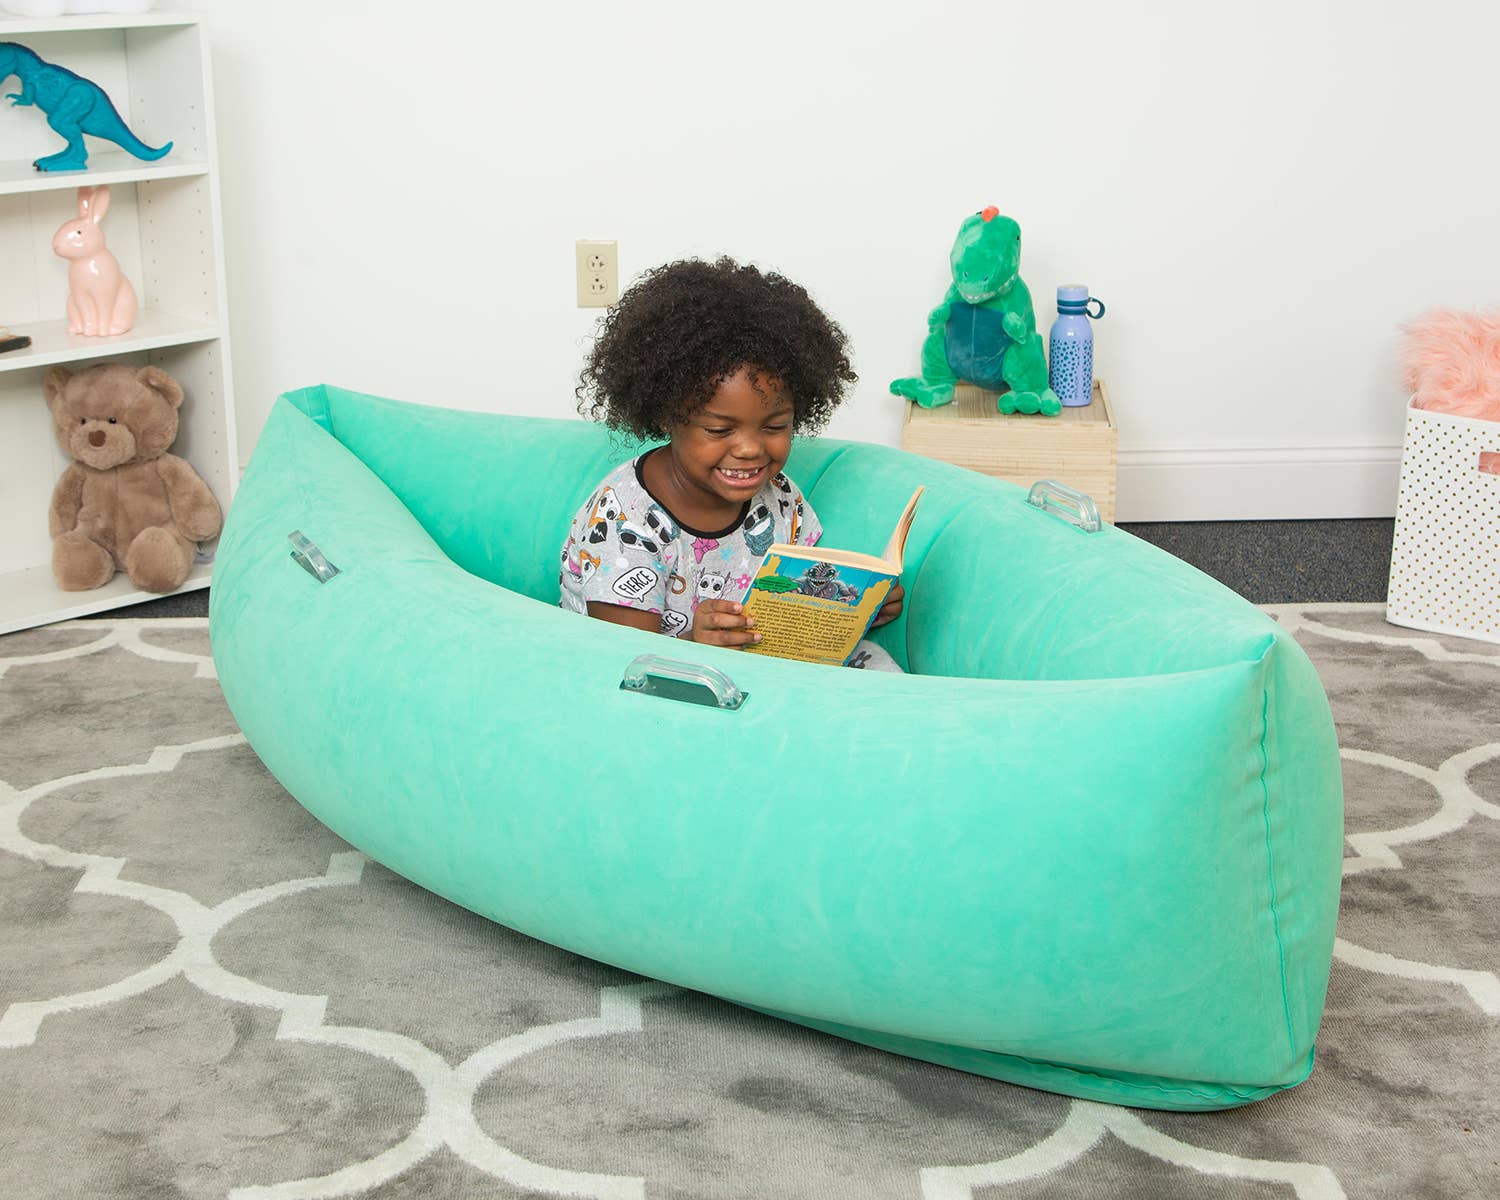 A child with dark skin tone and chin length curly black hair is smiling and holding open a book. They are sitting in a Teal Hugging Peapood (60"),